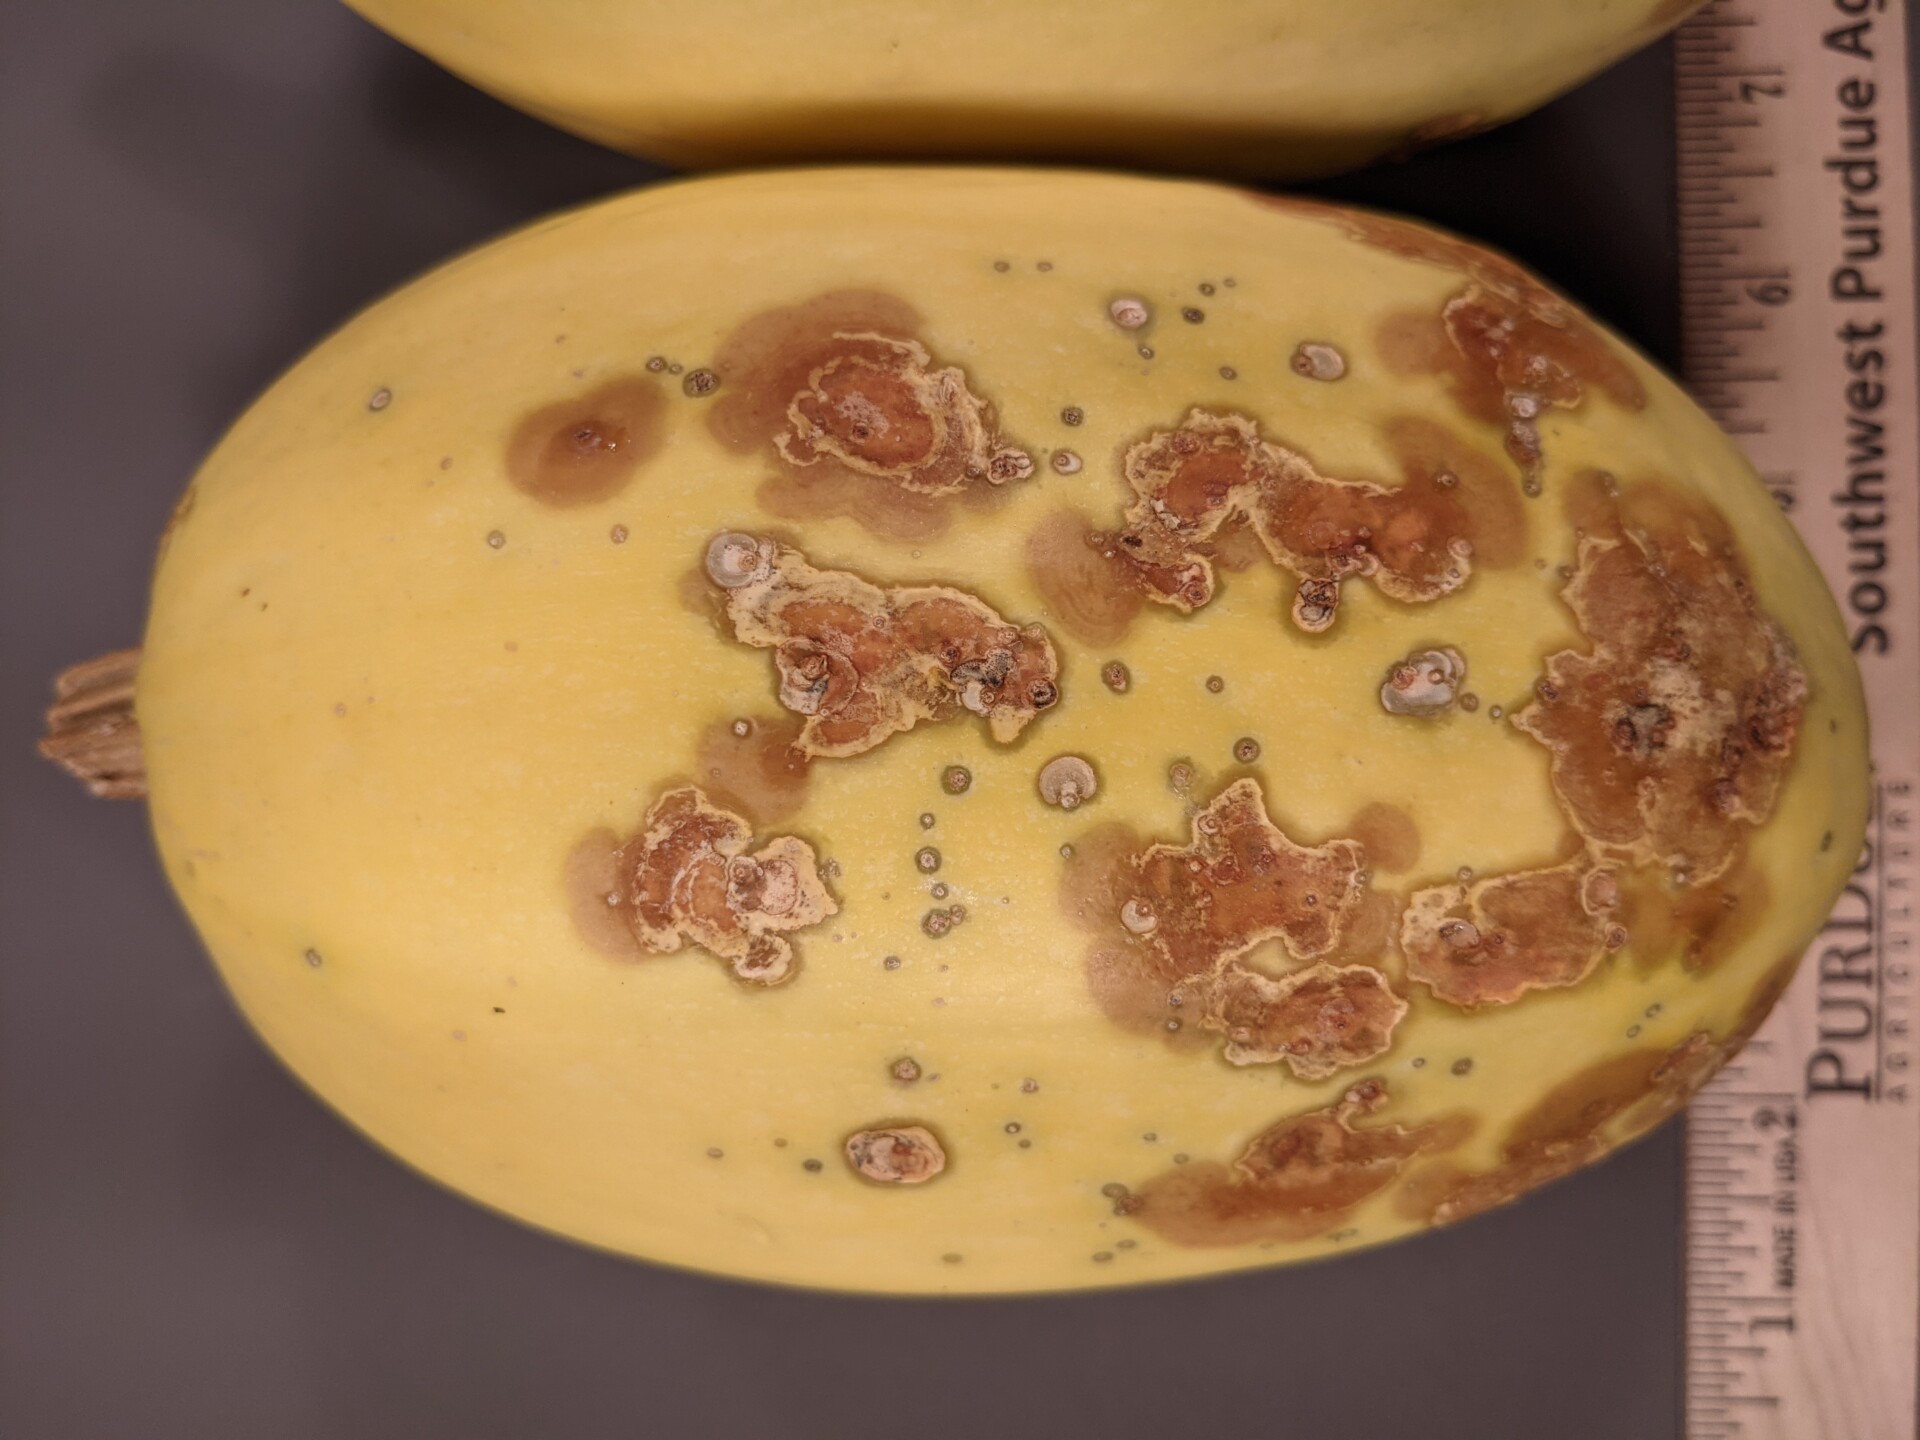 Bacterial spot and black rot of squash. Bacterial spot lesions are scabby and light brown lesions.